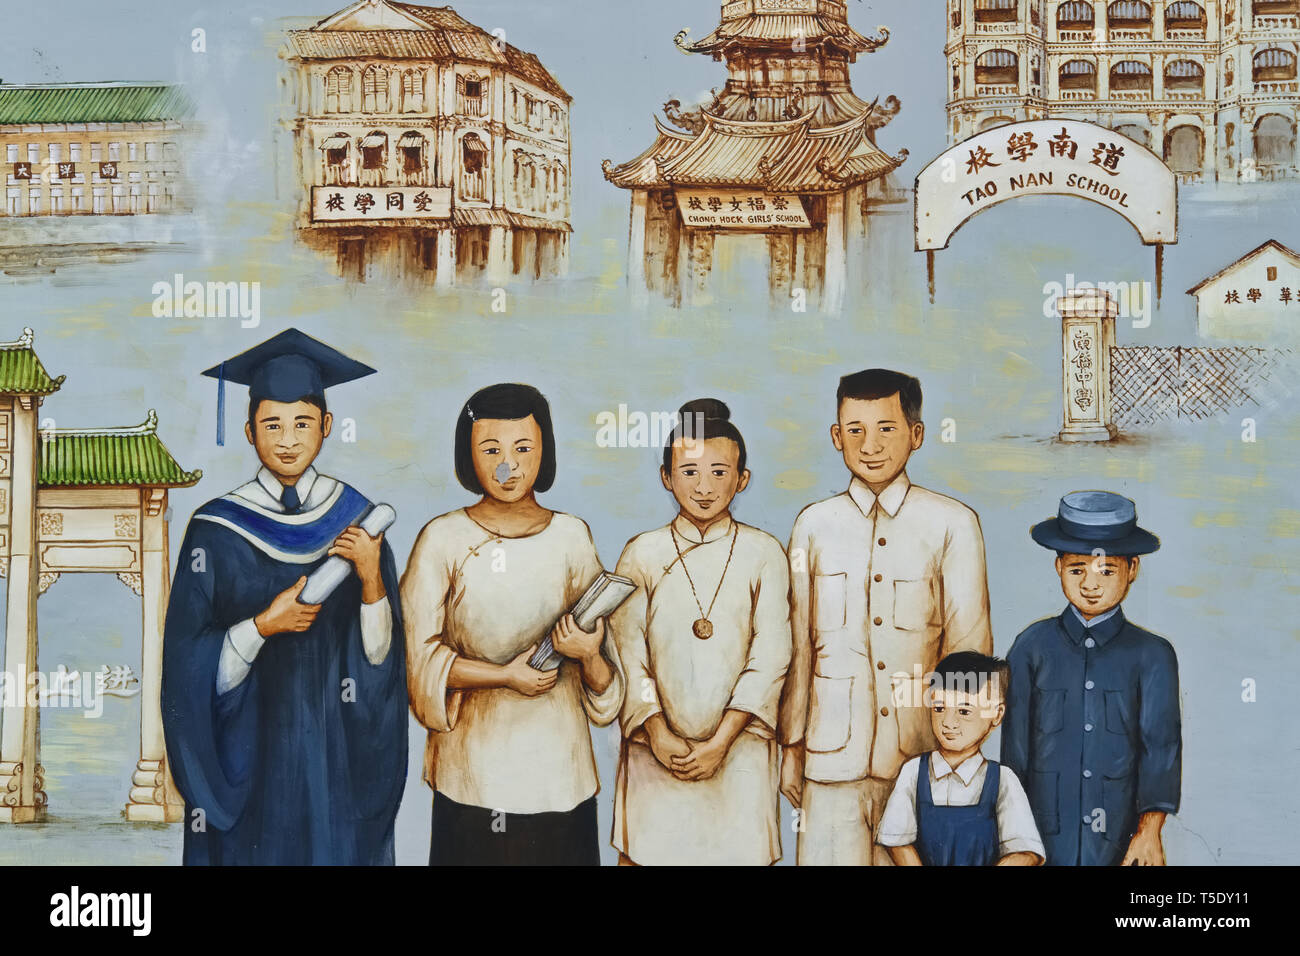 Part of a wall painting by Yip Yew Chong, showing an graduation scene in old Singapore, at the back of Thian Hock Keng Temple, Chinatown, Singapore Stock Photo